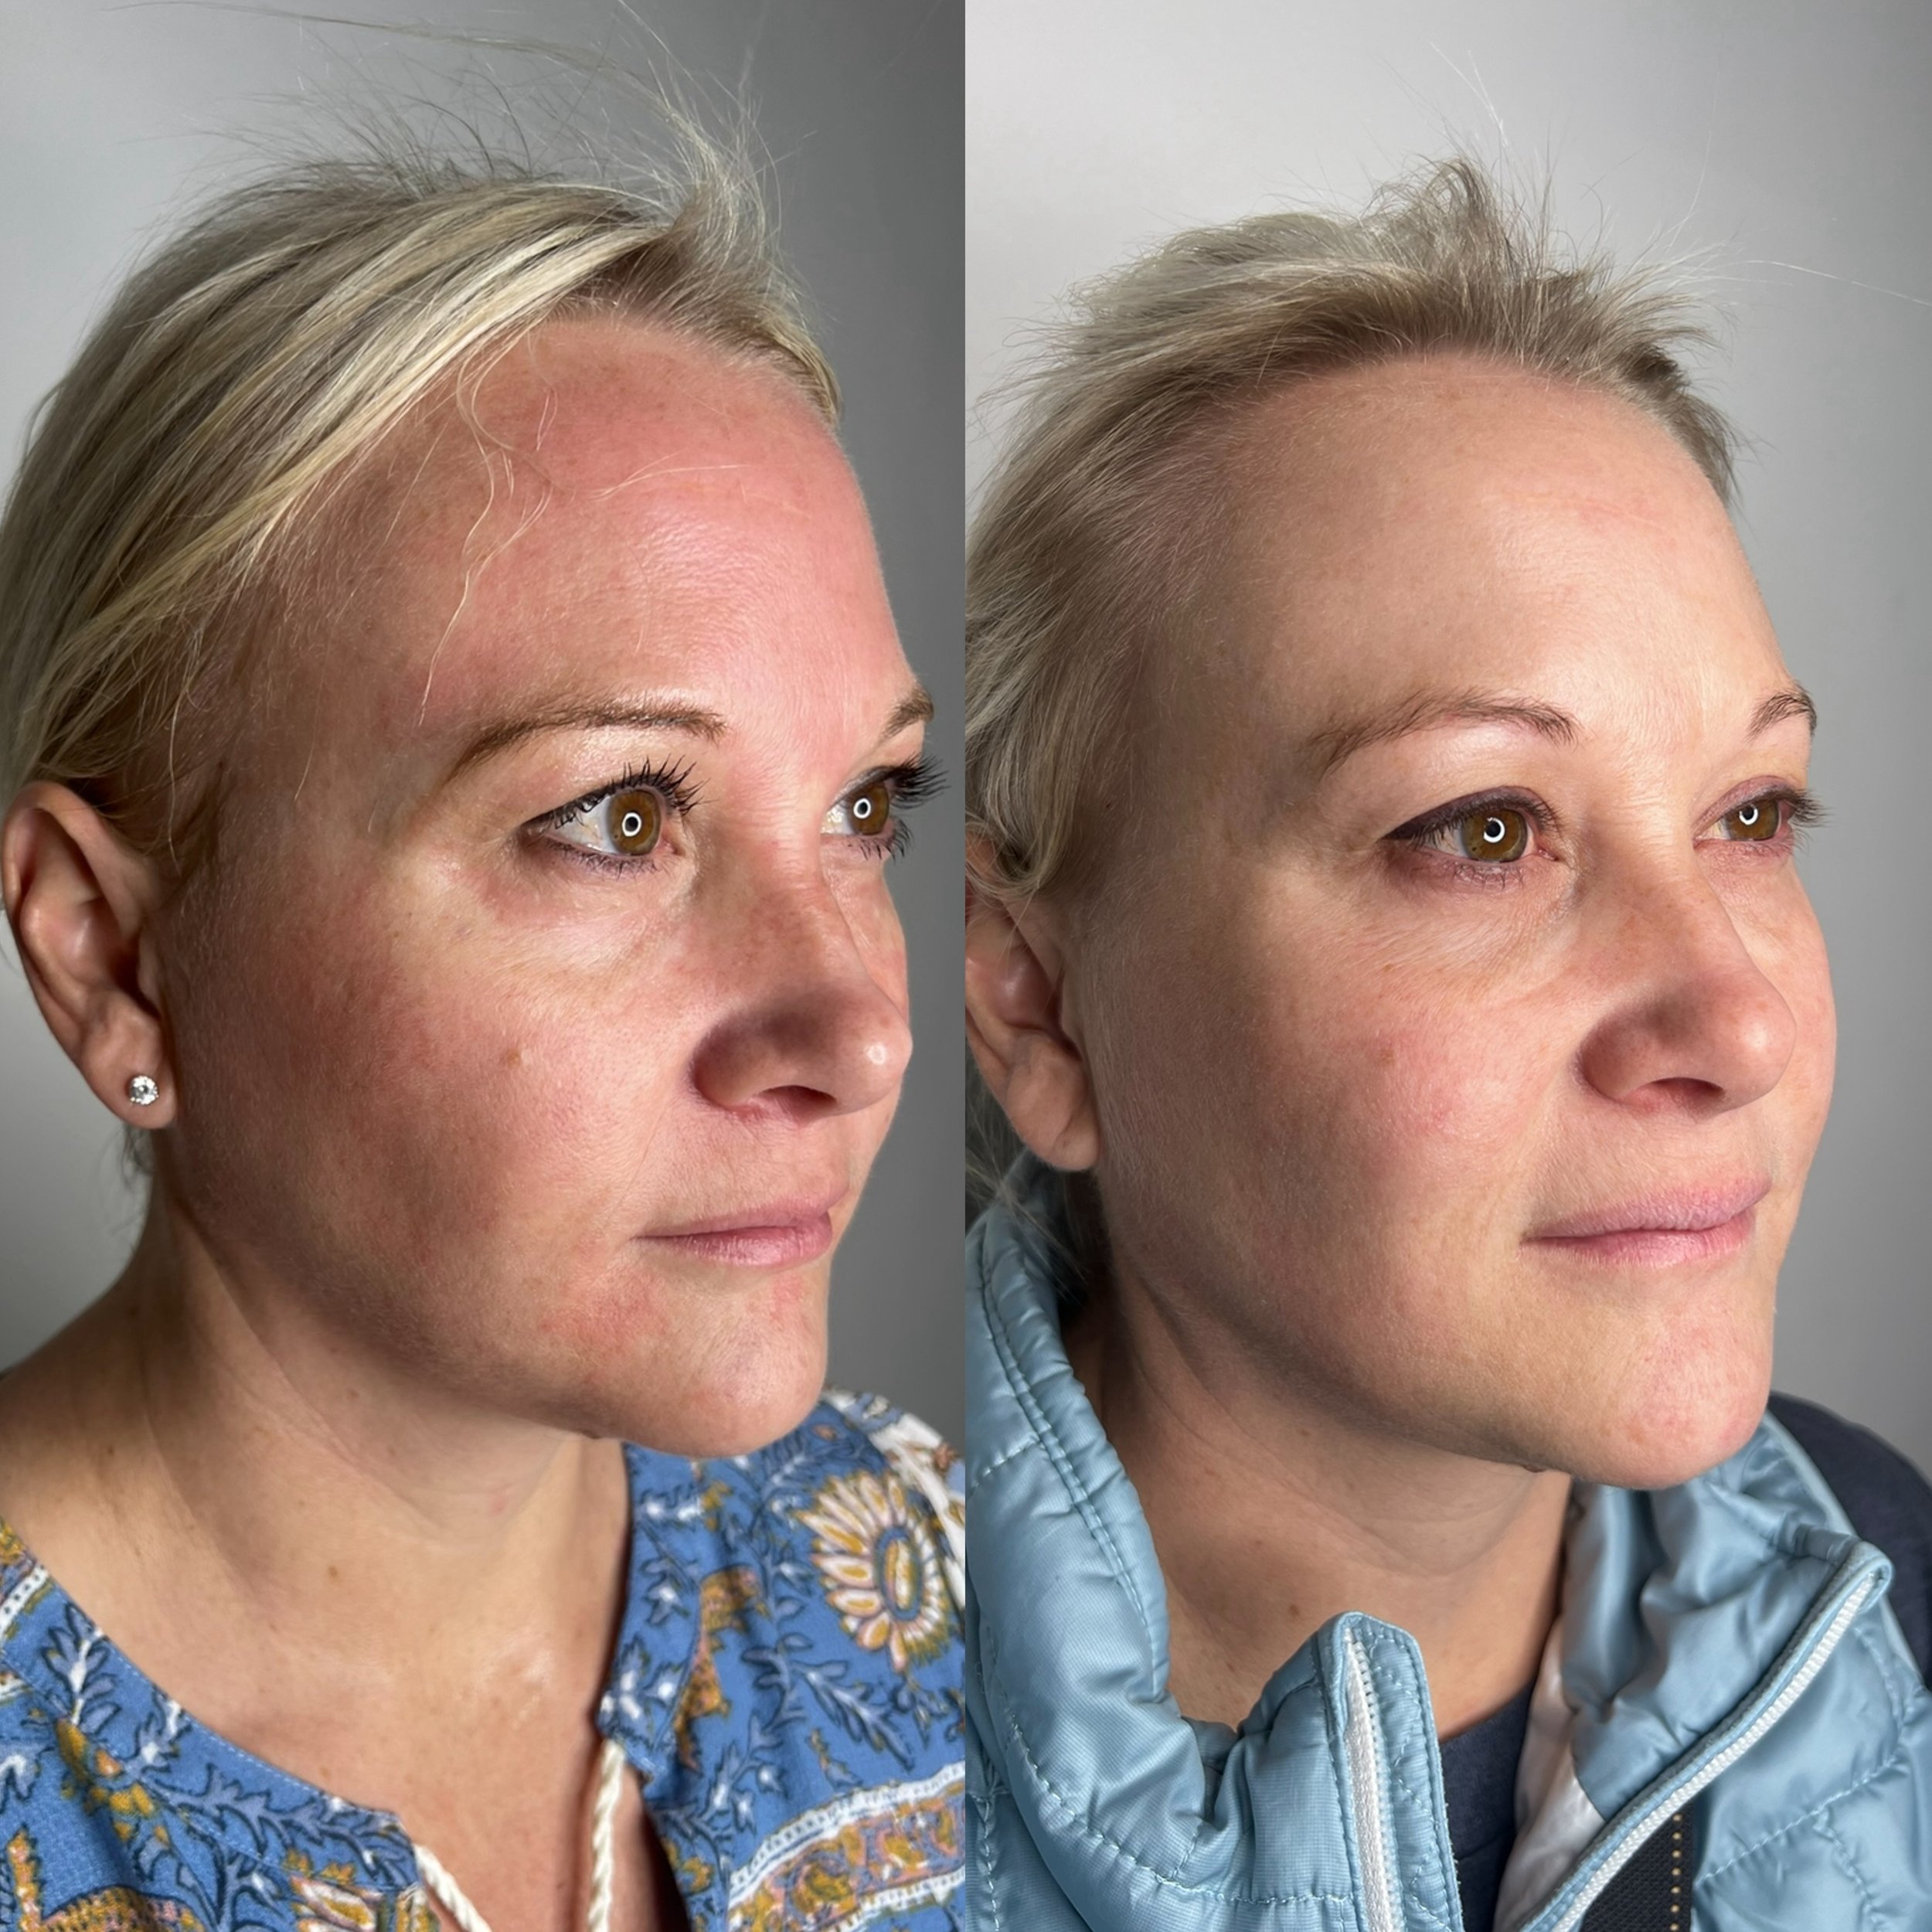 Address your skin concerns and irregularities with #morpheus8 + #ipl customizable fractional treatments🔥😌

Patients before and after, after just 1 treatment of ipl and morpheus8!!

-
-
-
_____________________________

👩🏻&zwj;⚕️Erica Roybal
(@eric